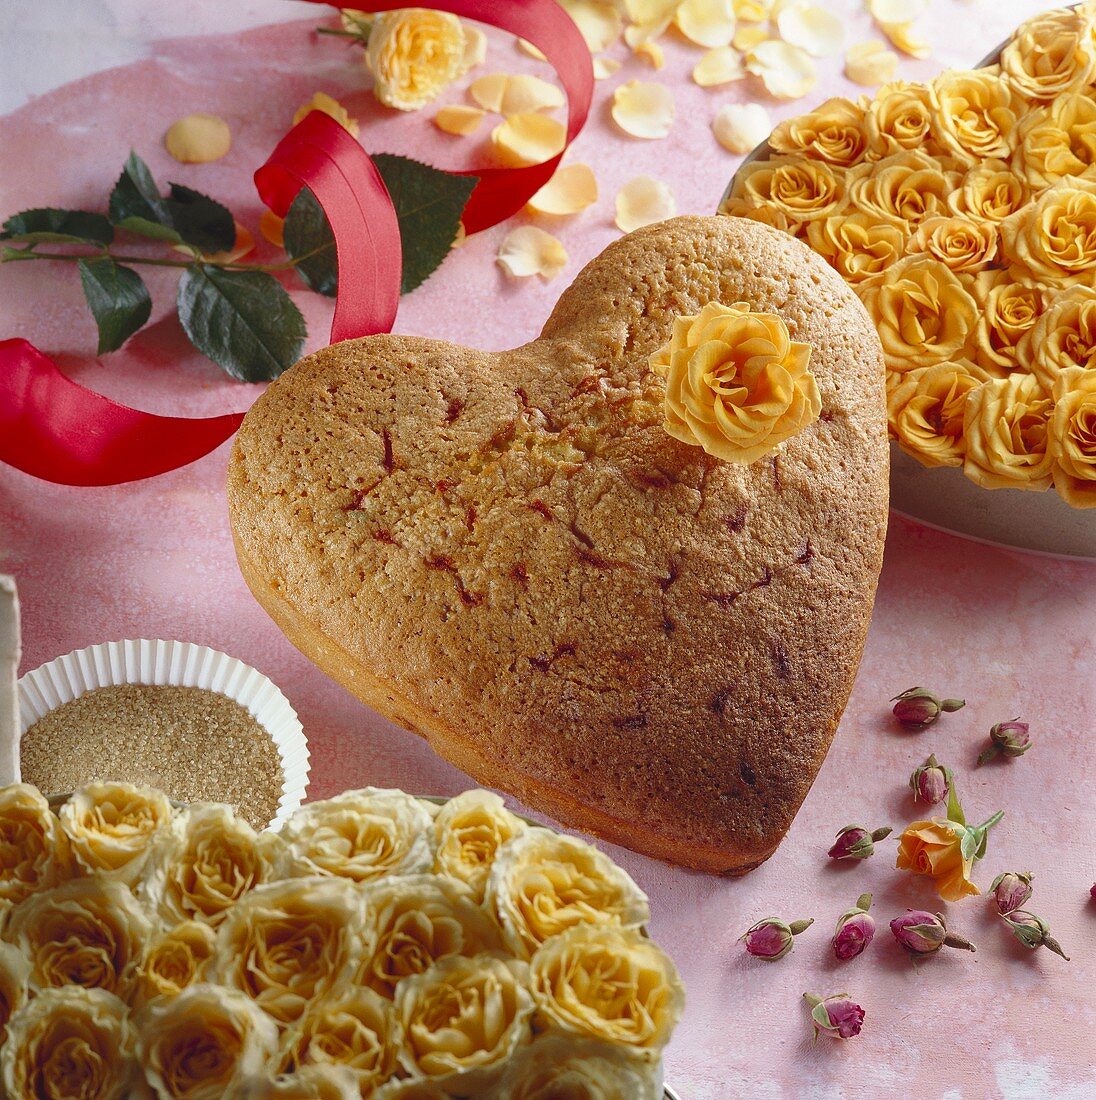 Heart-shaped cake with yellow rose